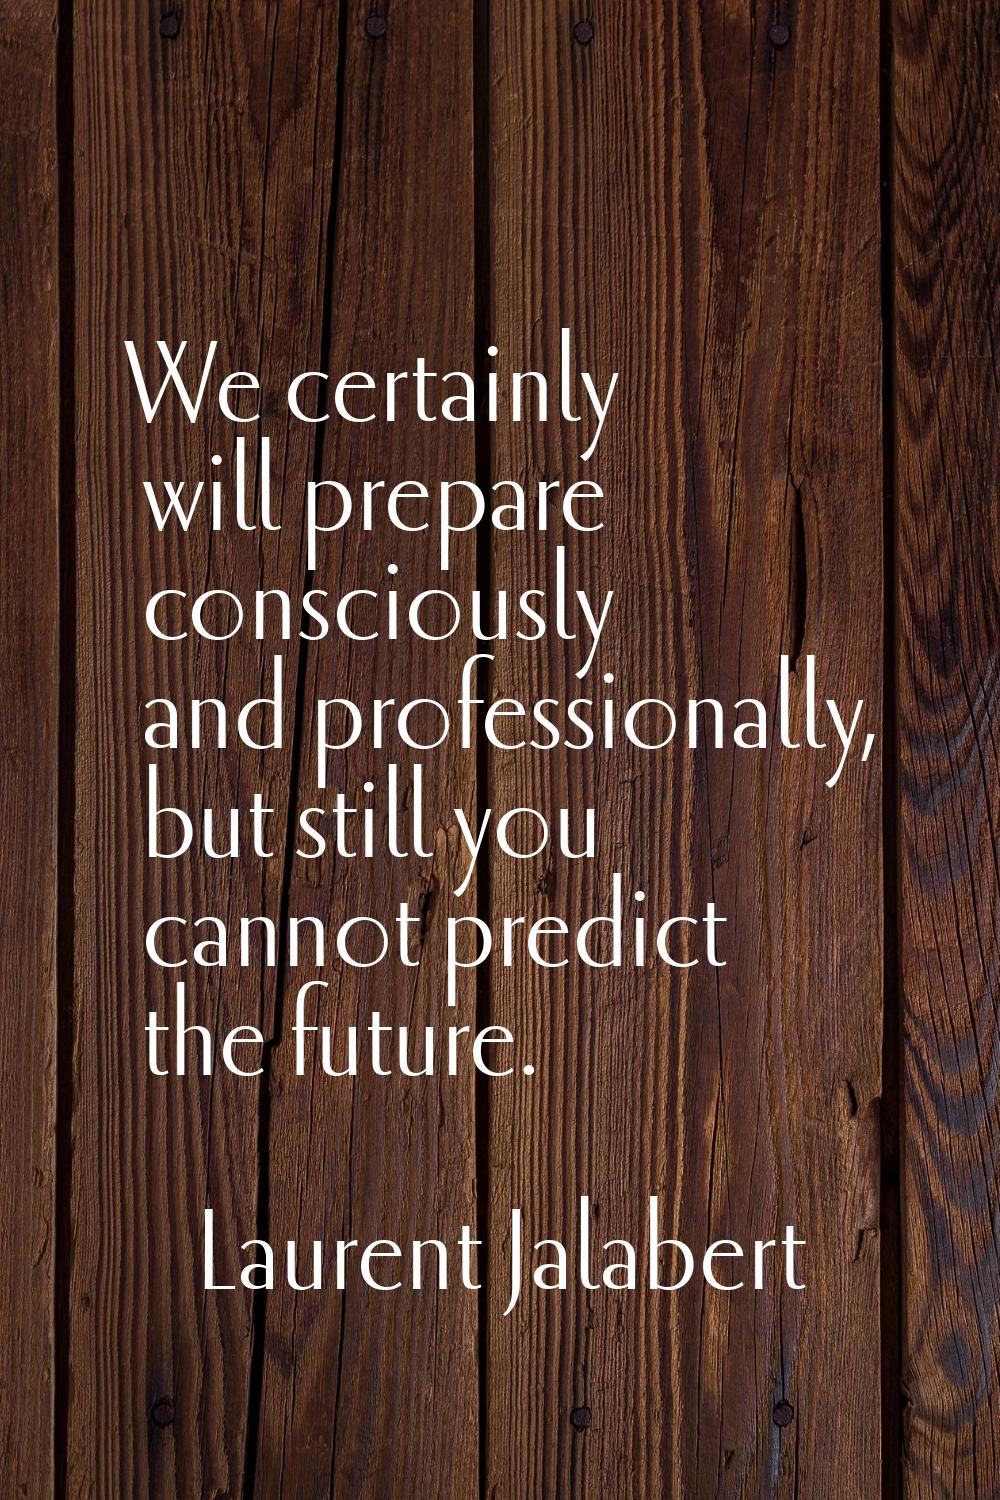 We certainly will prepare consciously and professionally, but still you cannot predict the future.